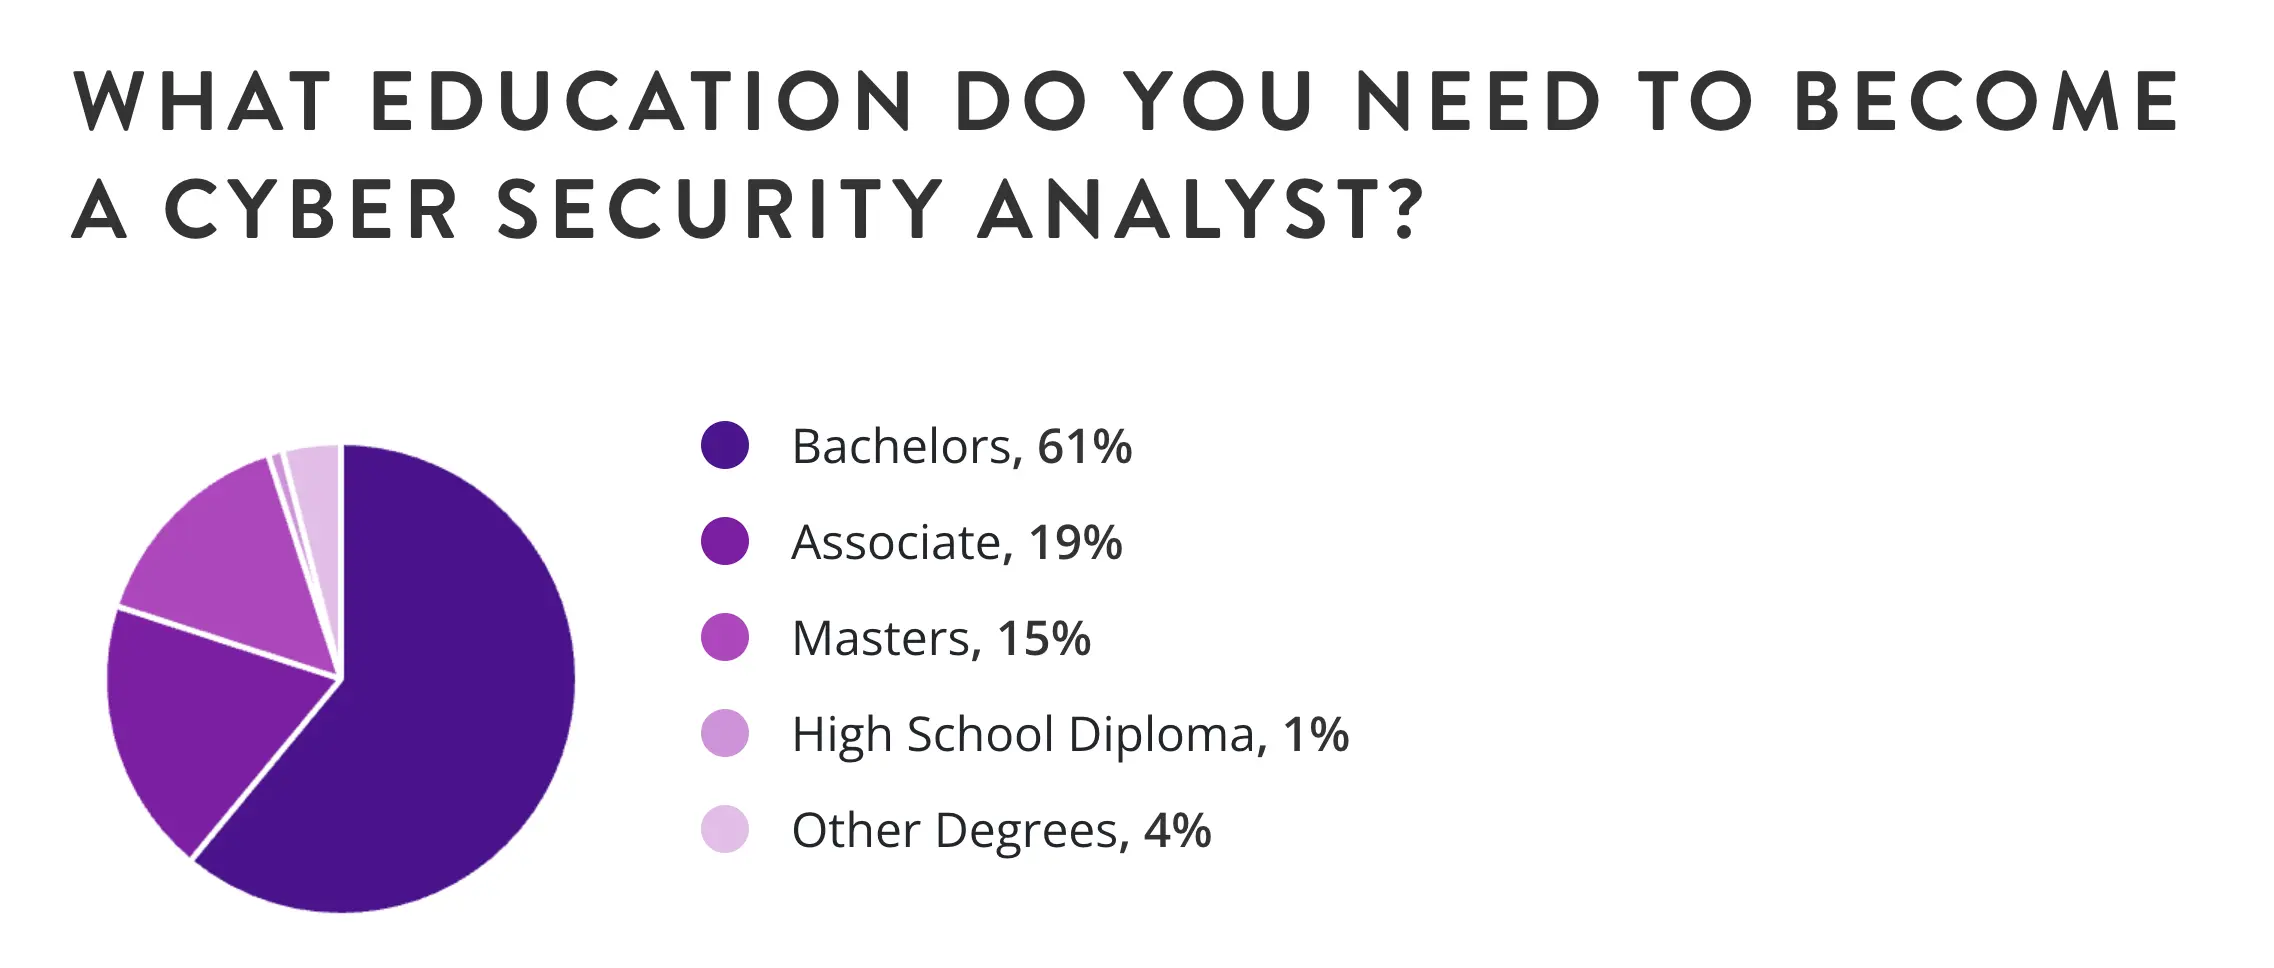 Cybersecurity Analysts Education